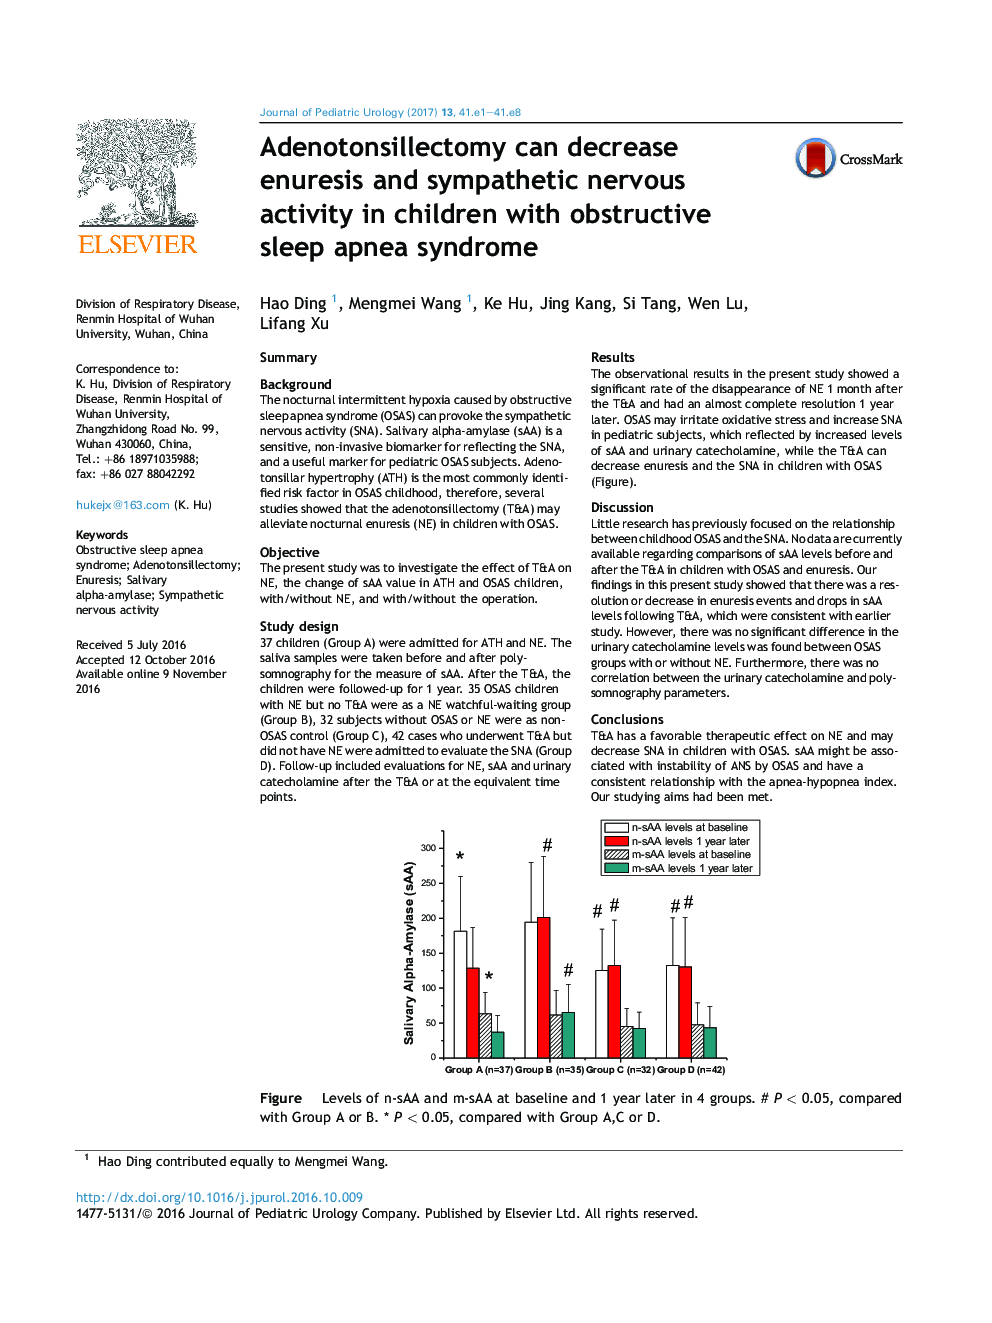 Adenotonsillectomy can decrease enuresis and sympathetic nervous activity in children with obstructive sleep apnea syndrome